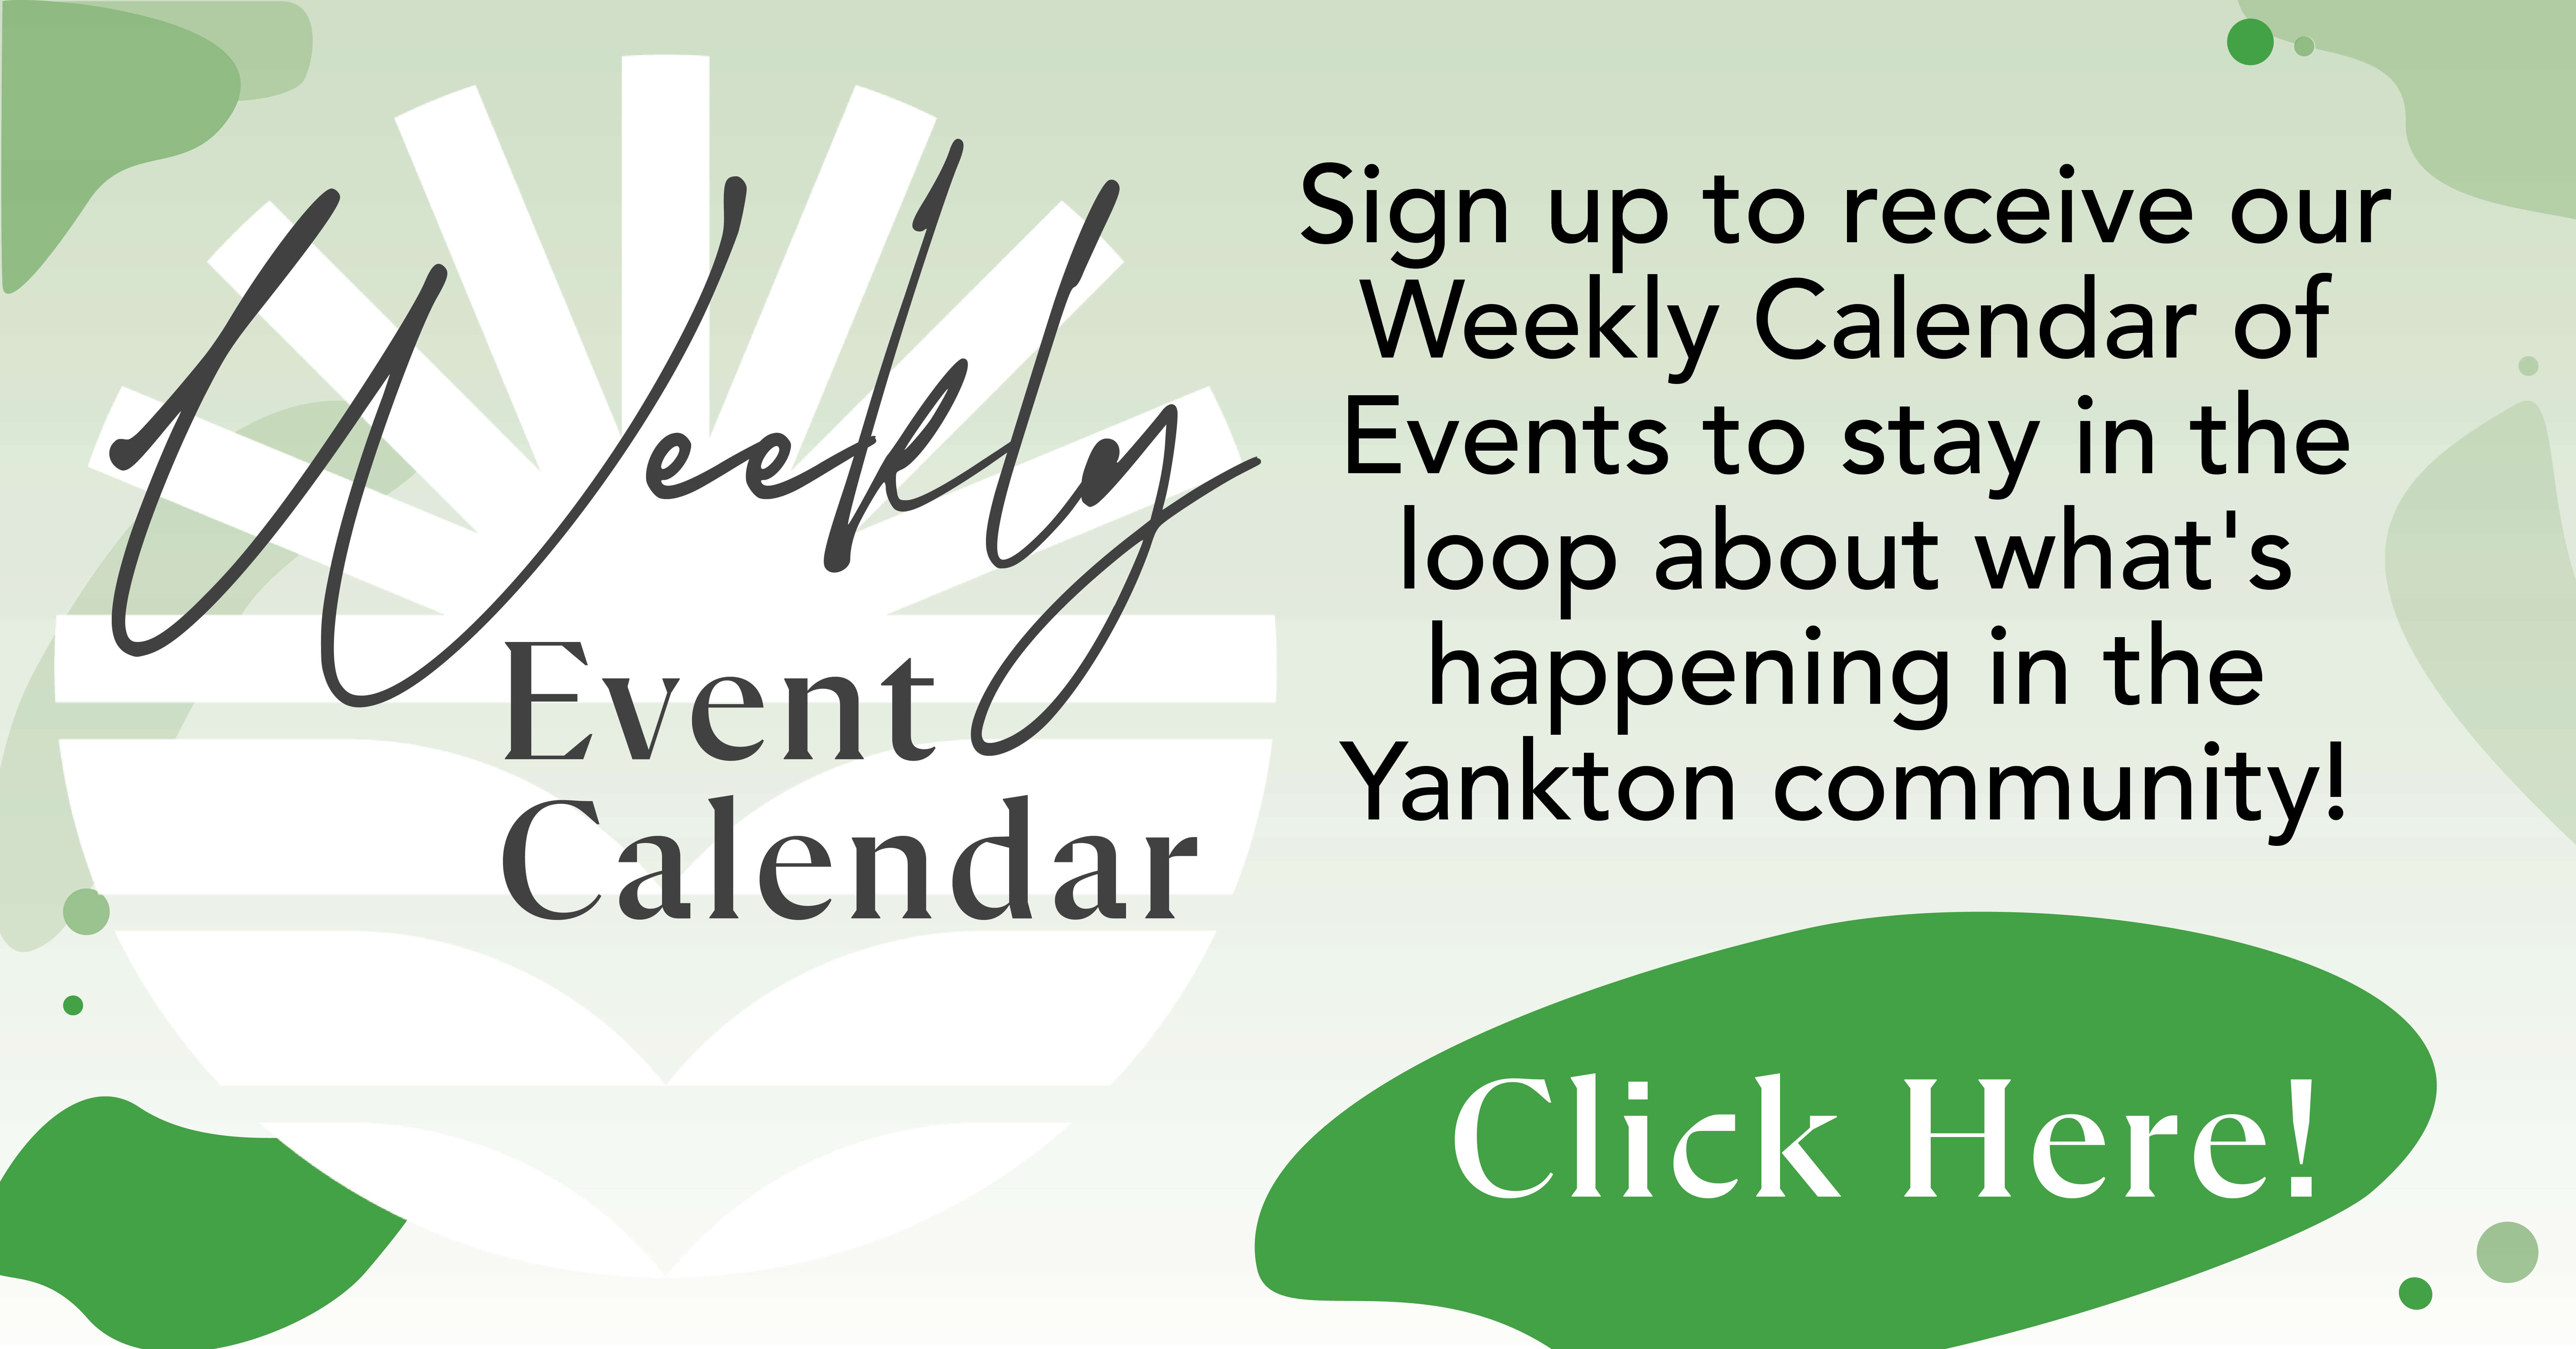 Weekly Events Calendar Newsletter Promotion (1)